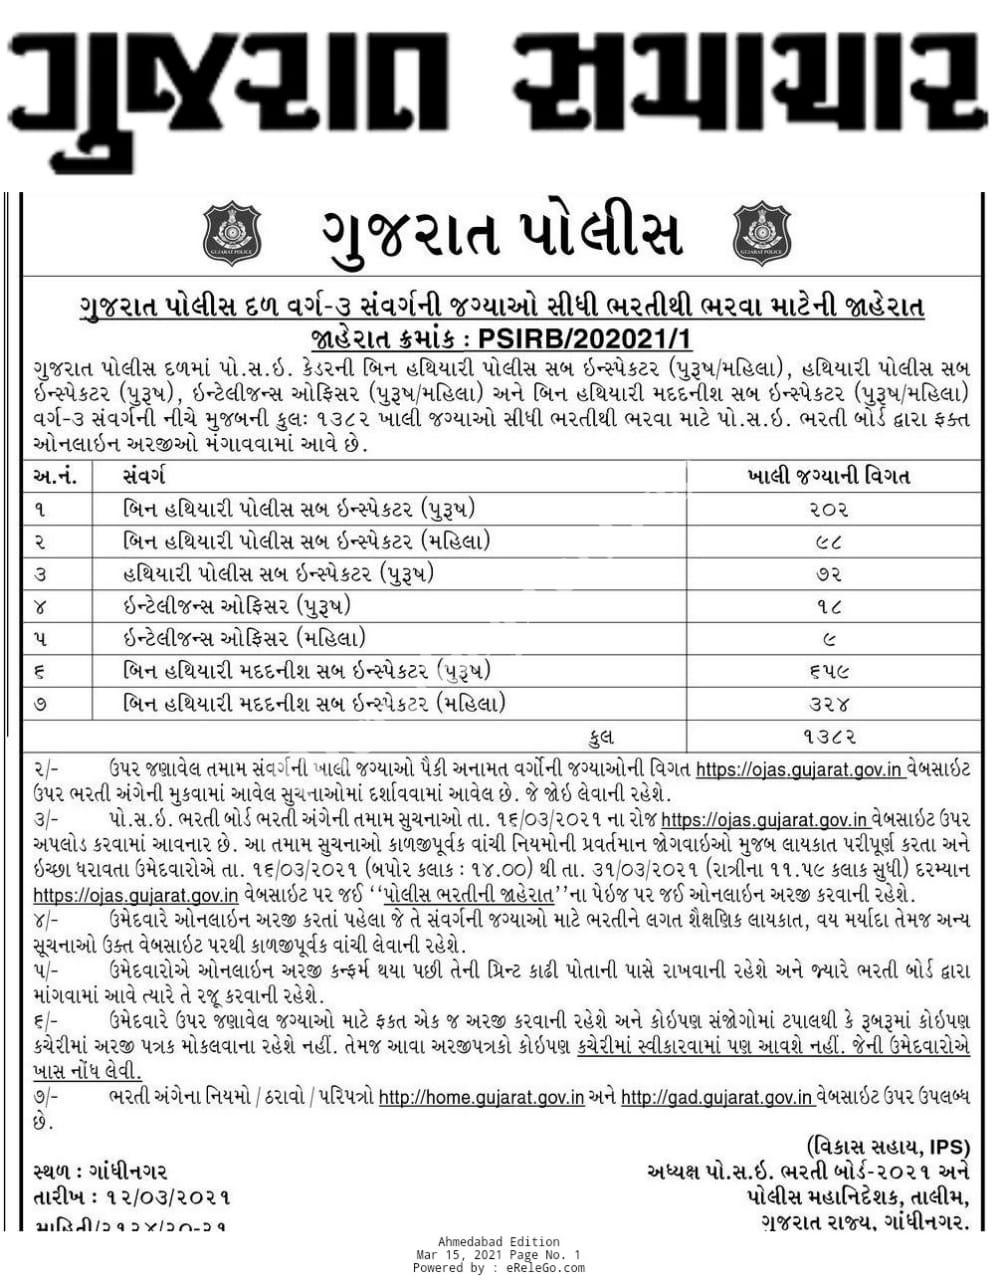 This recruitment announcement for 1382 posts in Gujarat Police Force